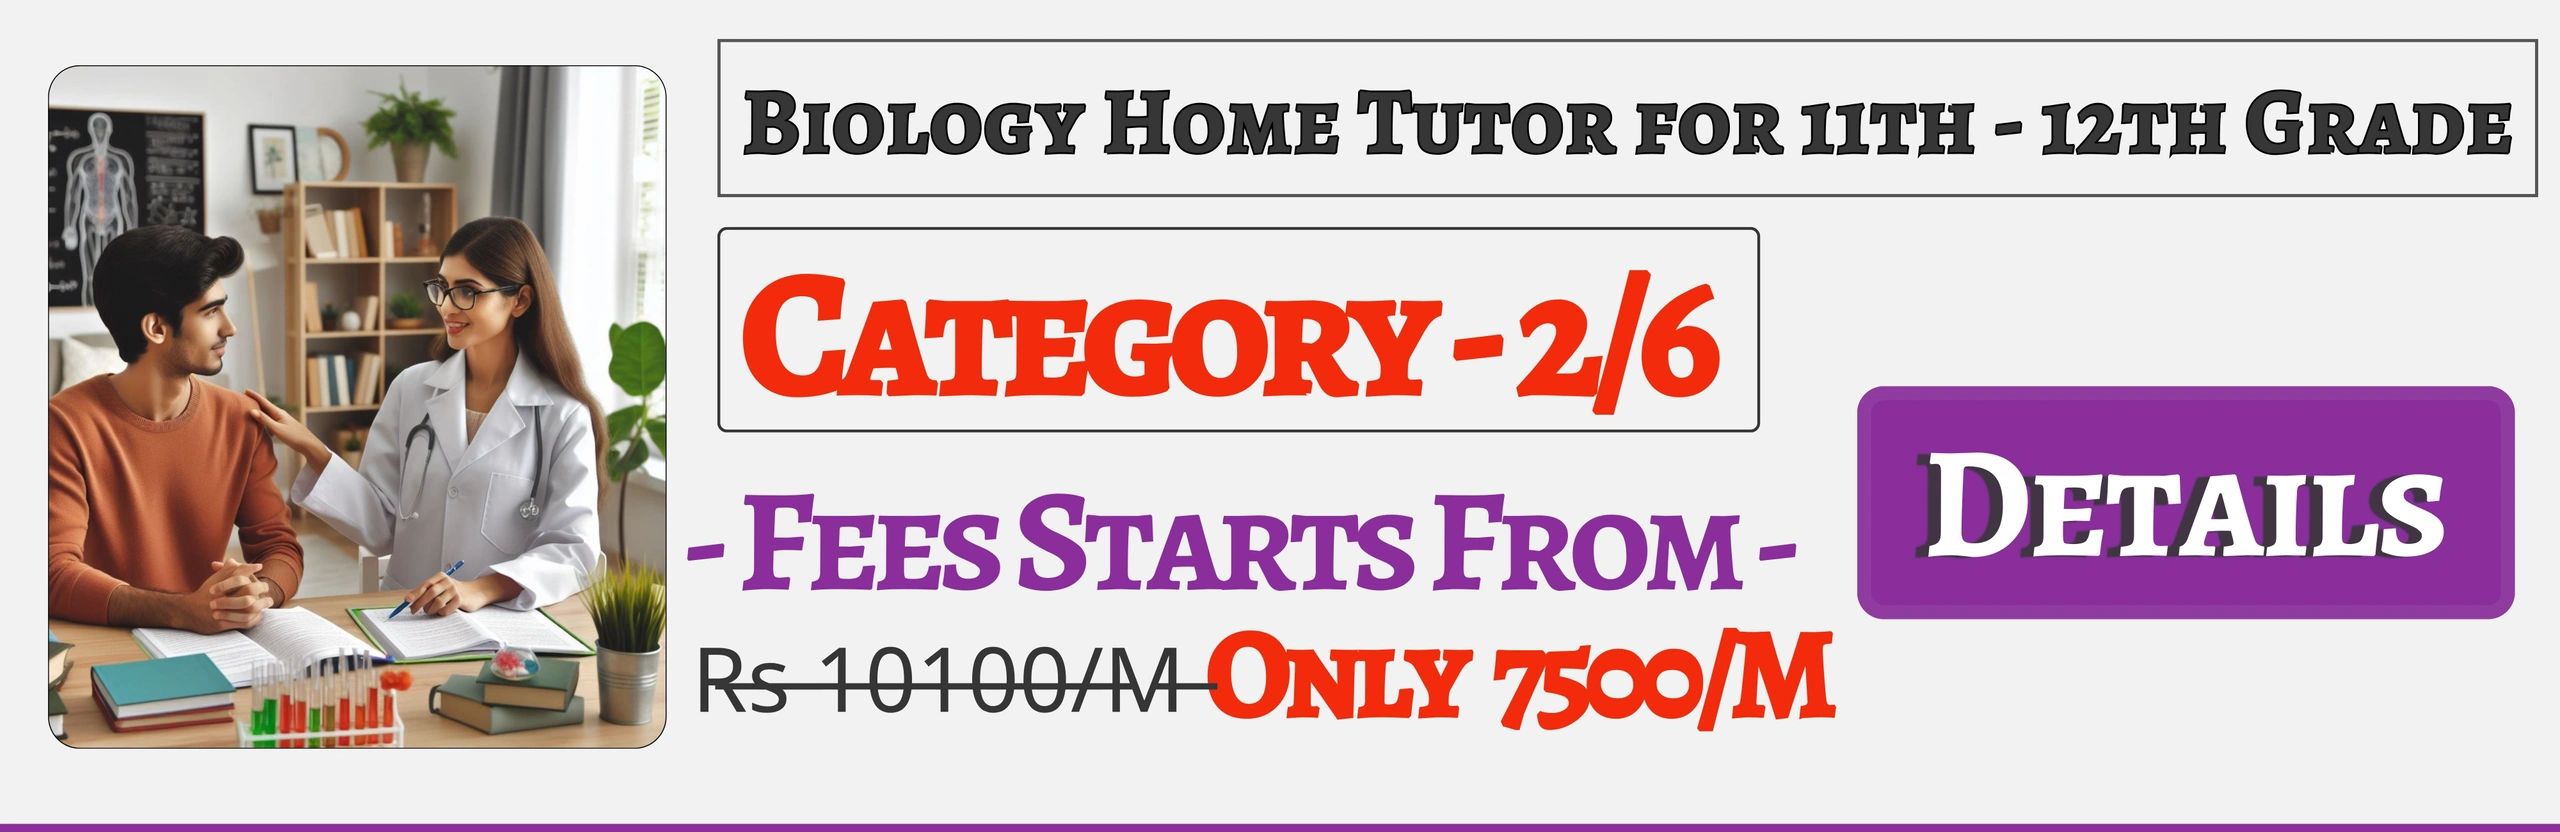 Book Best Nearby Biology Home Tuition Tutors For 11th & 12th In Jaipur , Fees Only 7500/M